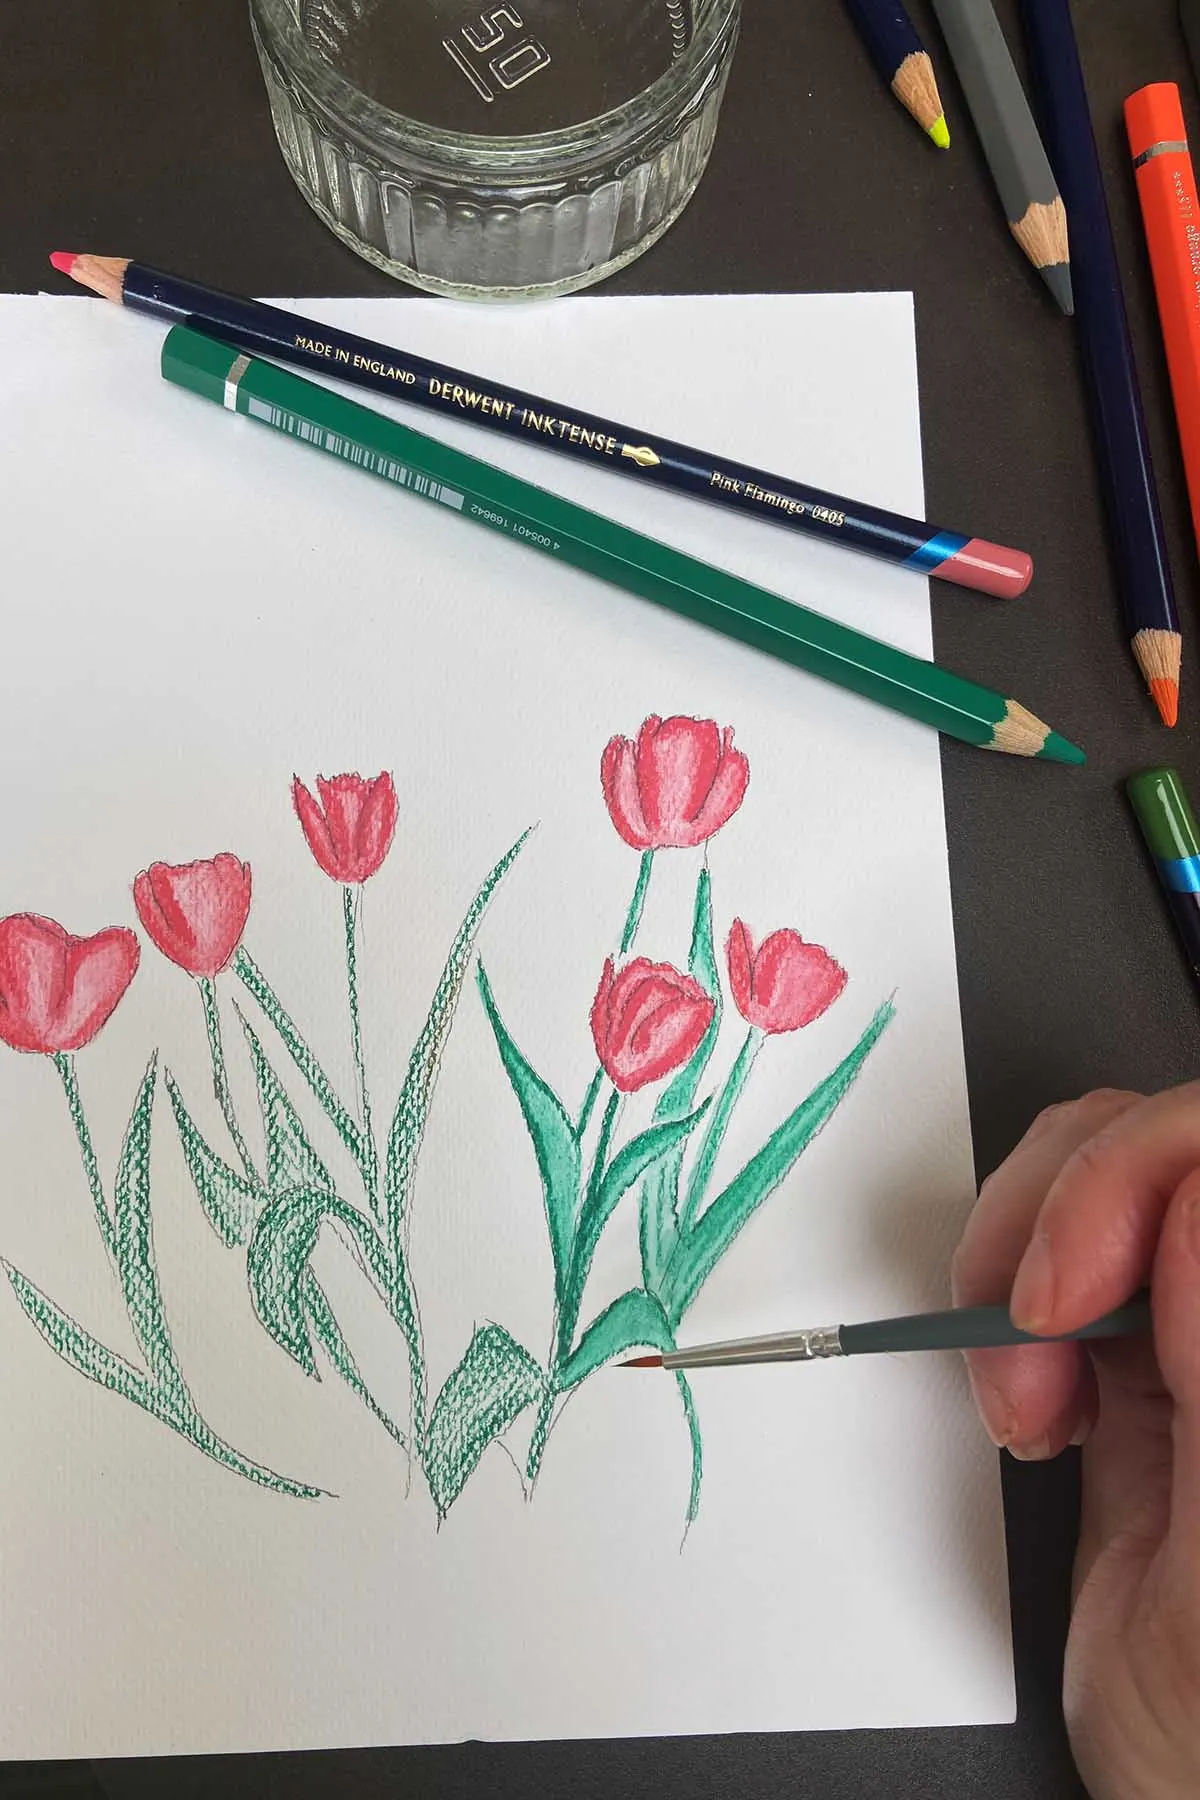 colouring tulips with watercolour pens and water brush. showing hand and pencils